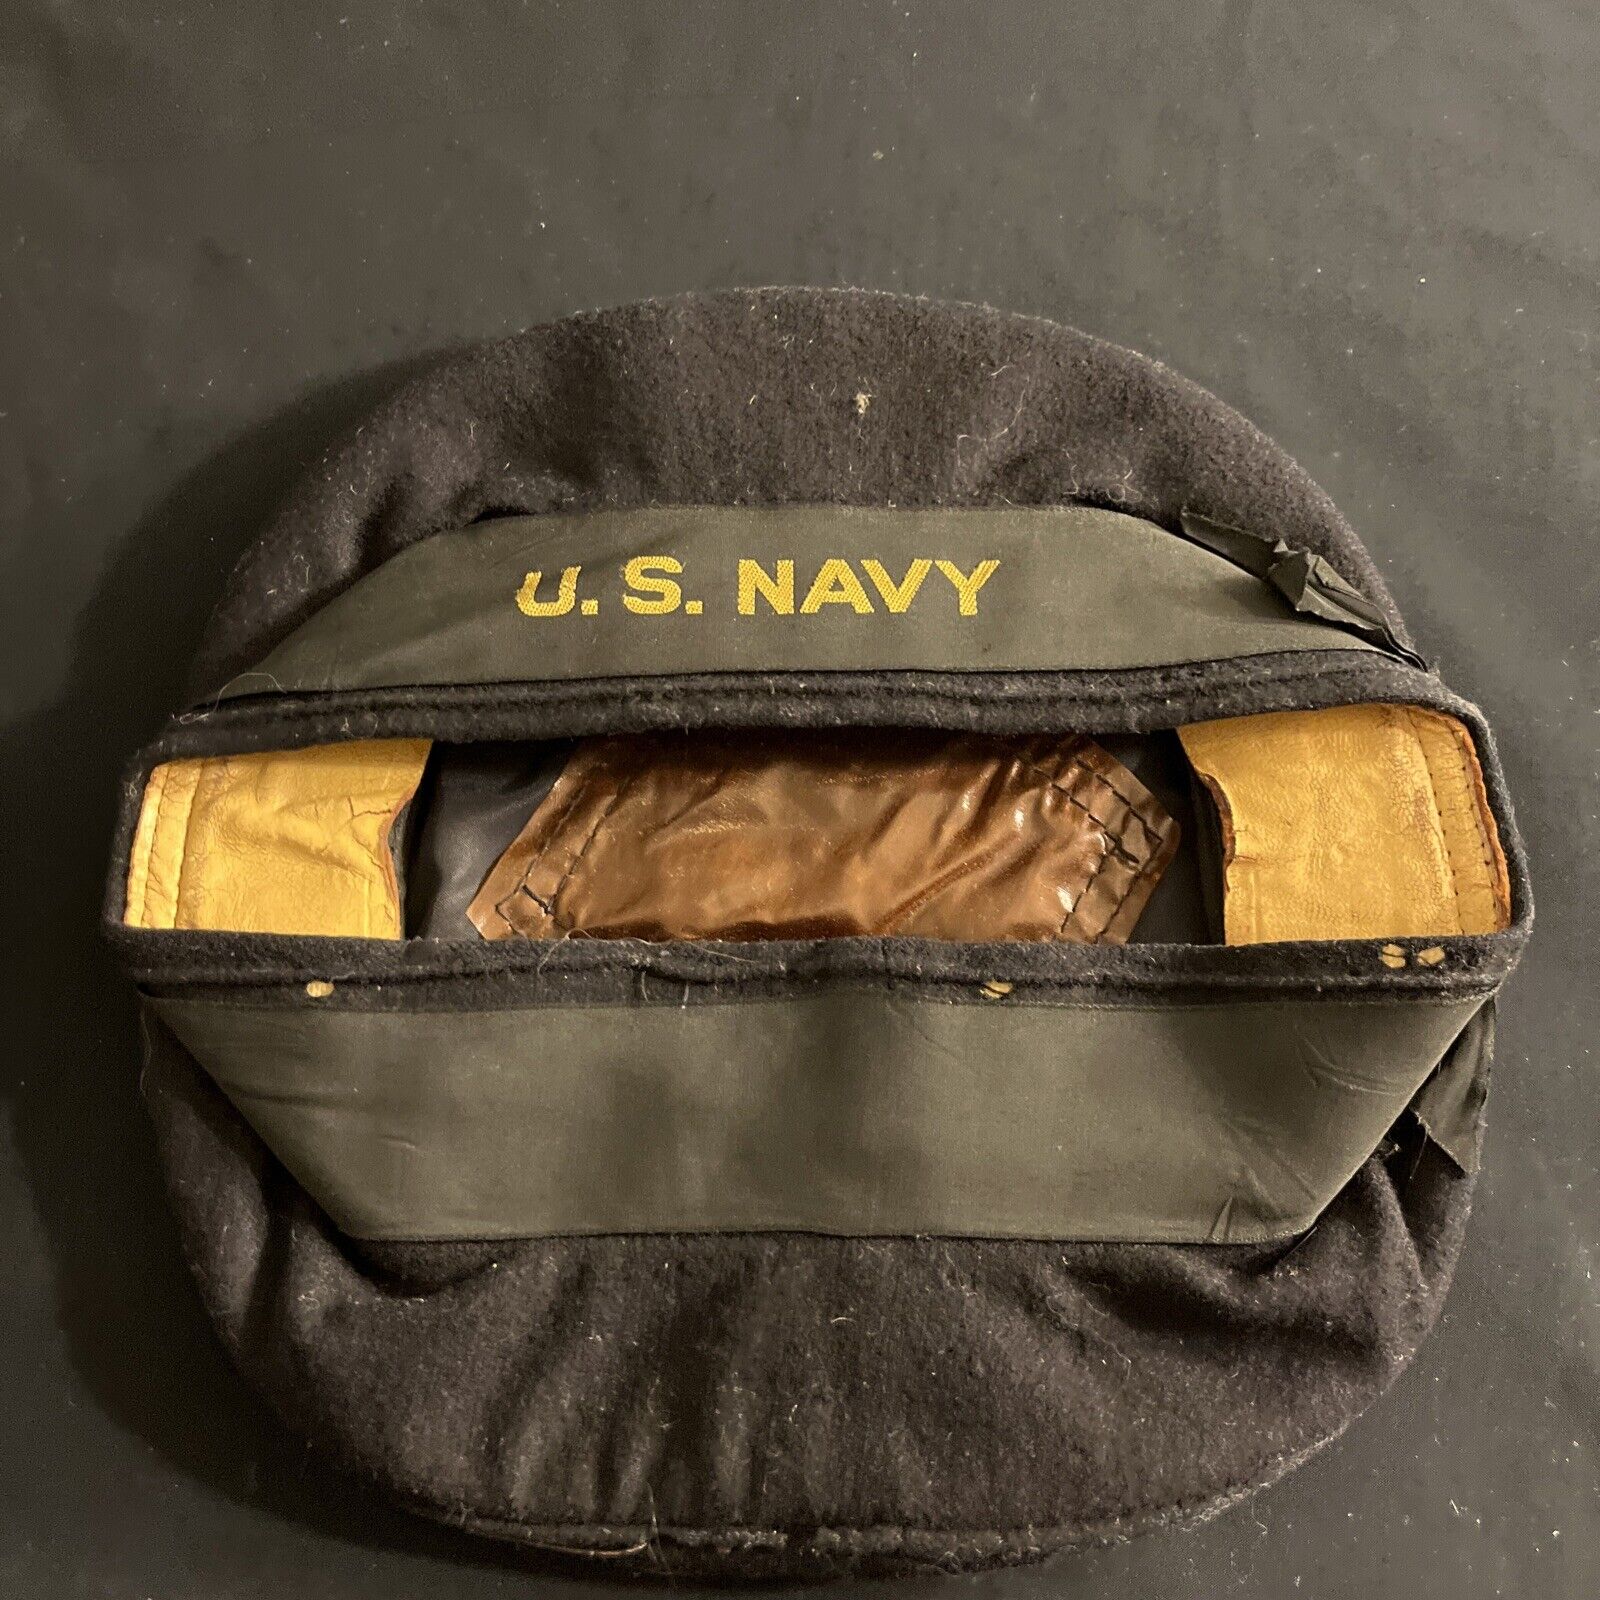 ANTIQUE WWII MILITARY SUBMARINER SAILOR US NAVY HAT SIZE 6-7/8